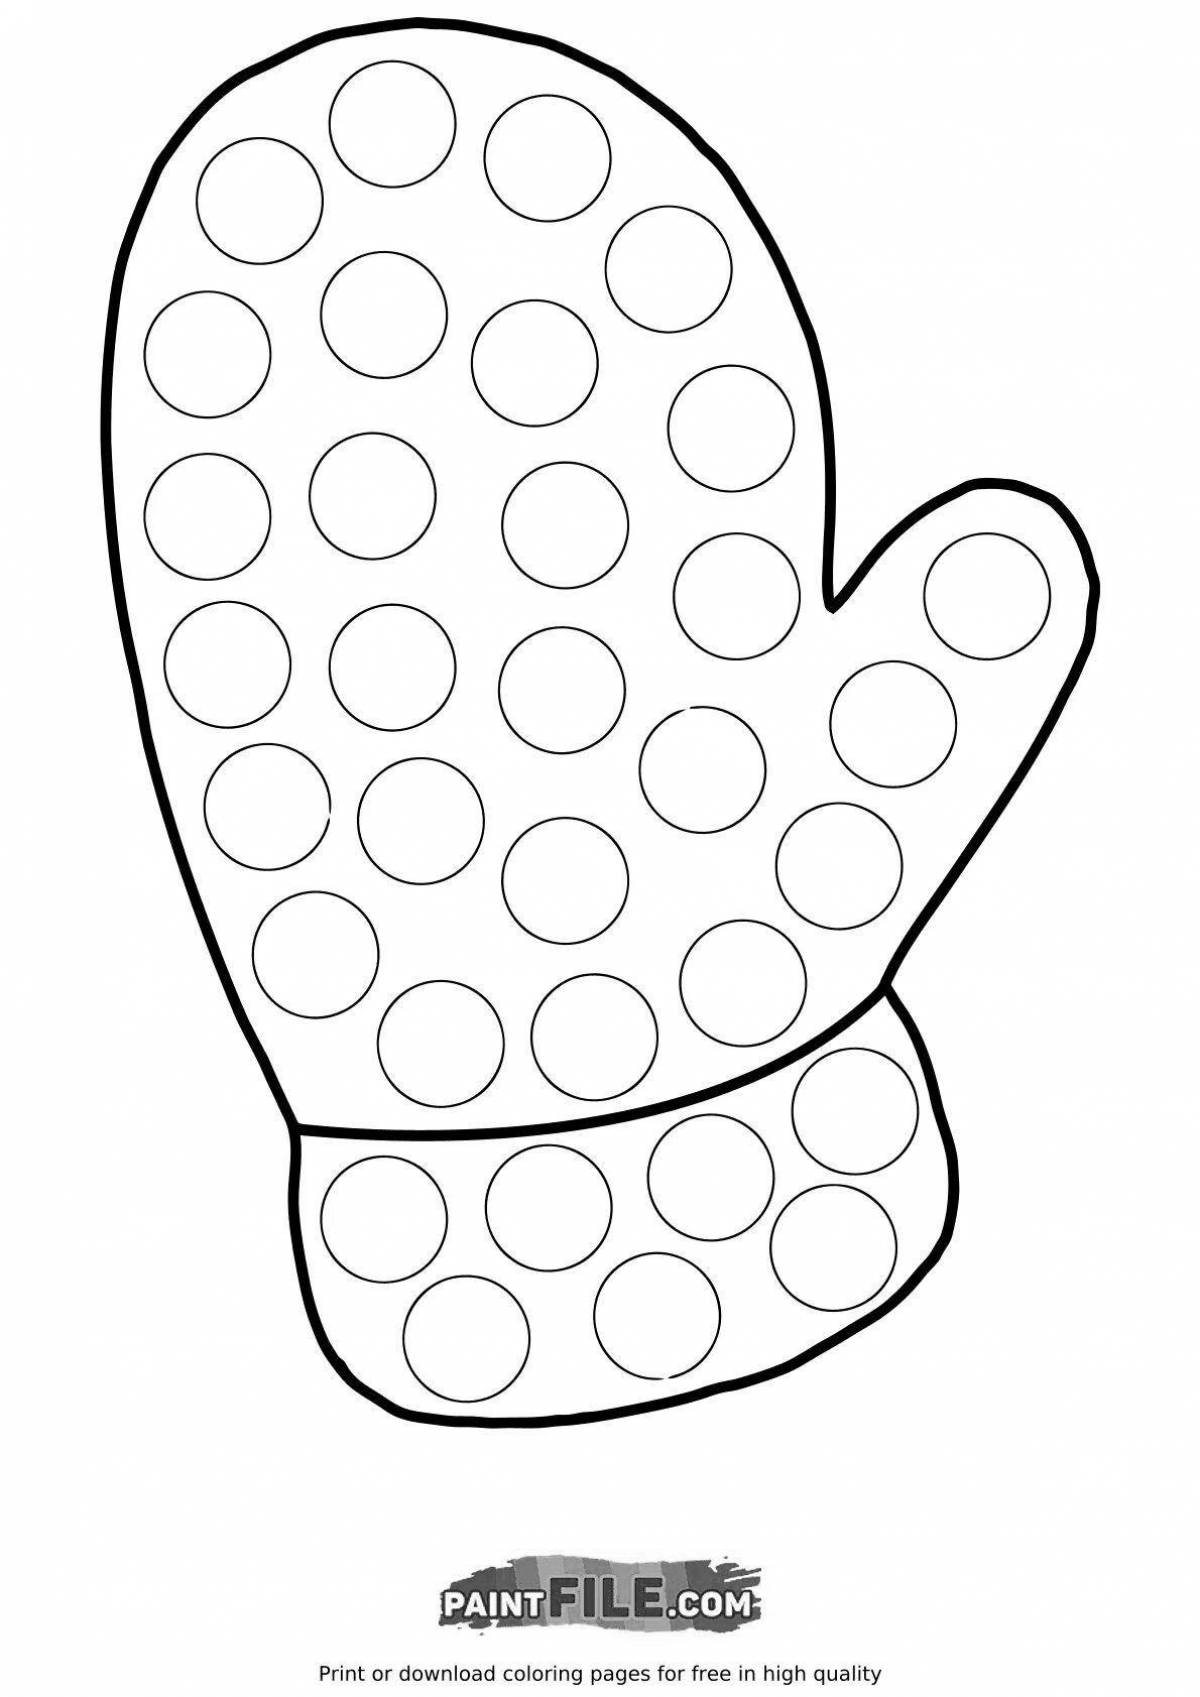 Creative mittens coloring book for kids